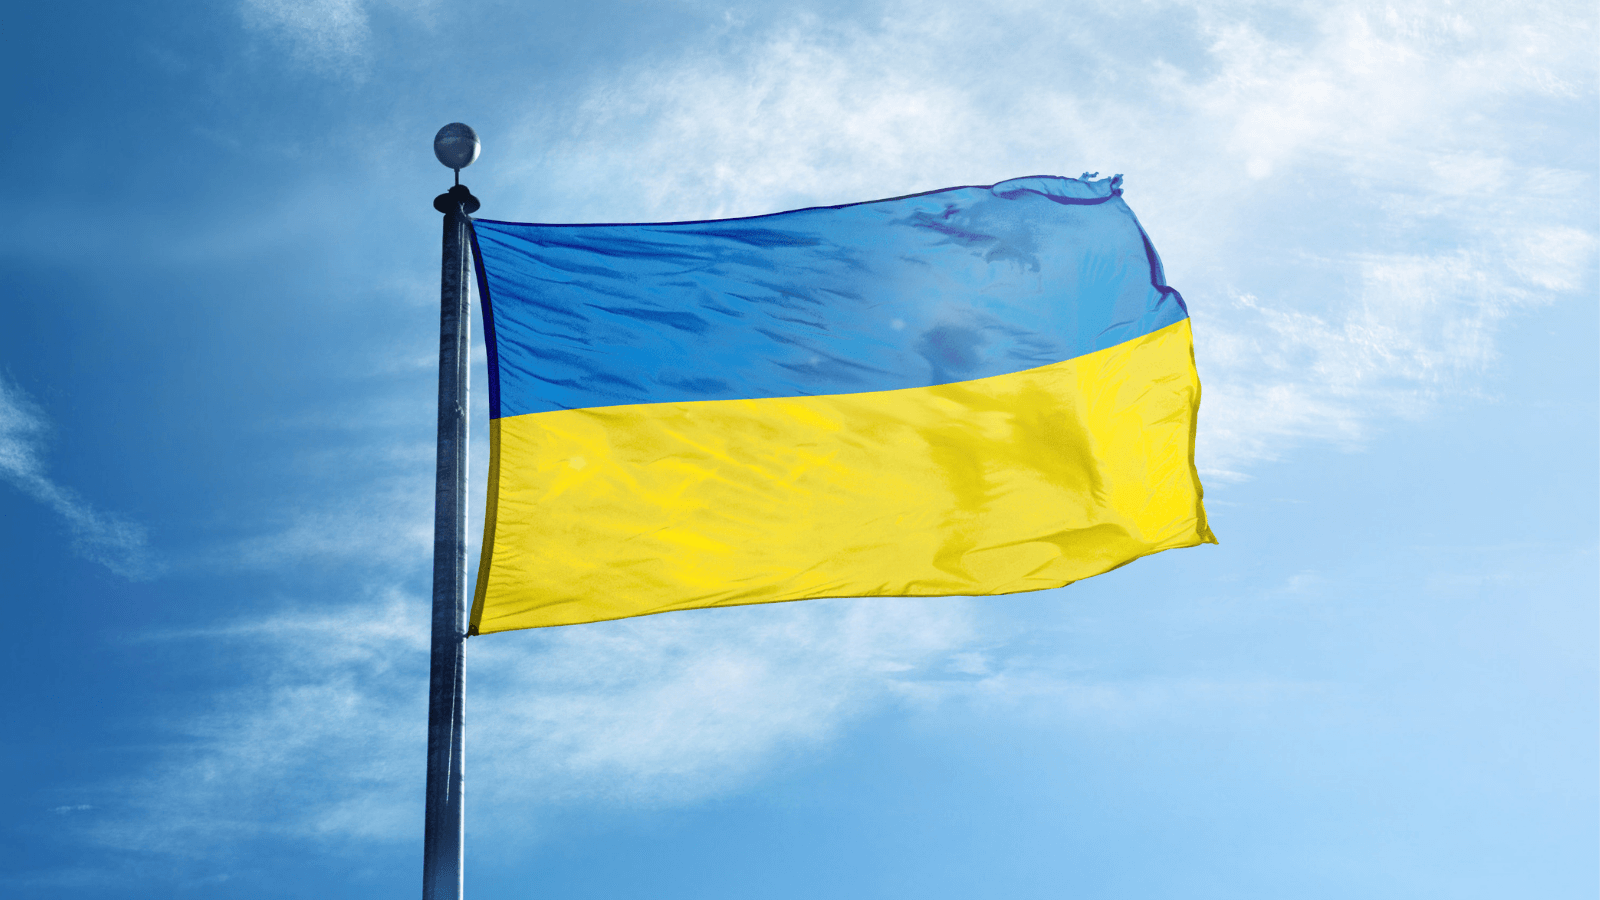 A photo of the Ukrainian flag flies in front of of a bright blue sky.